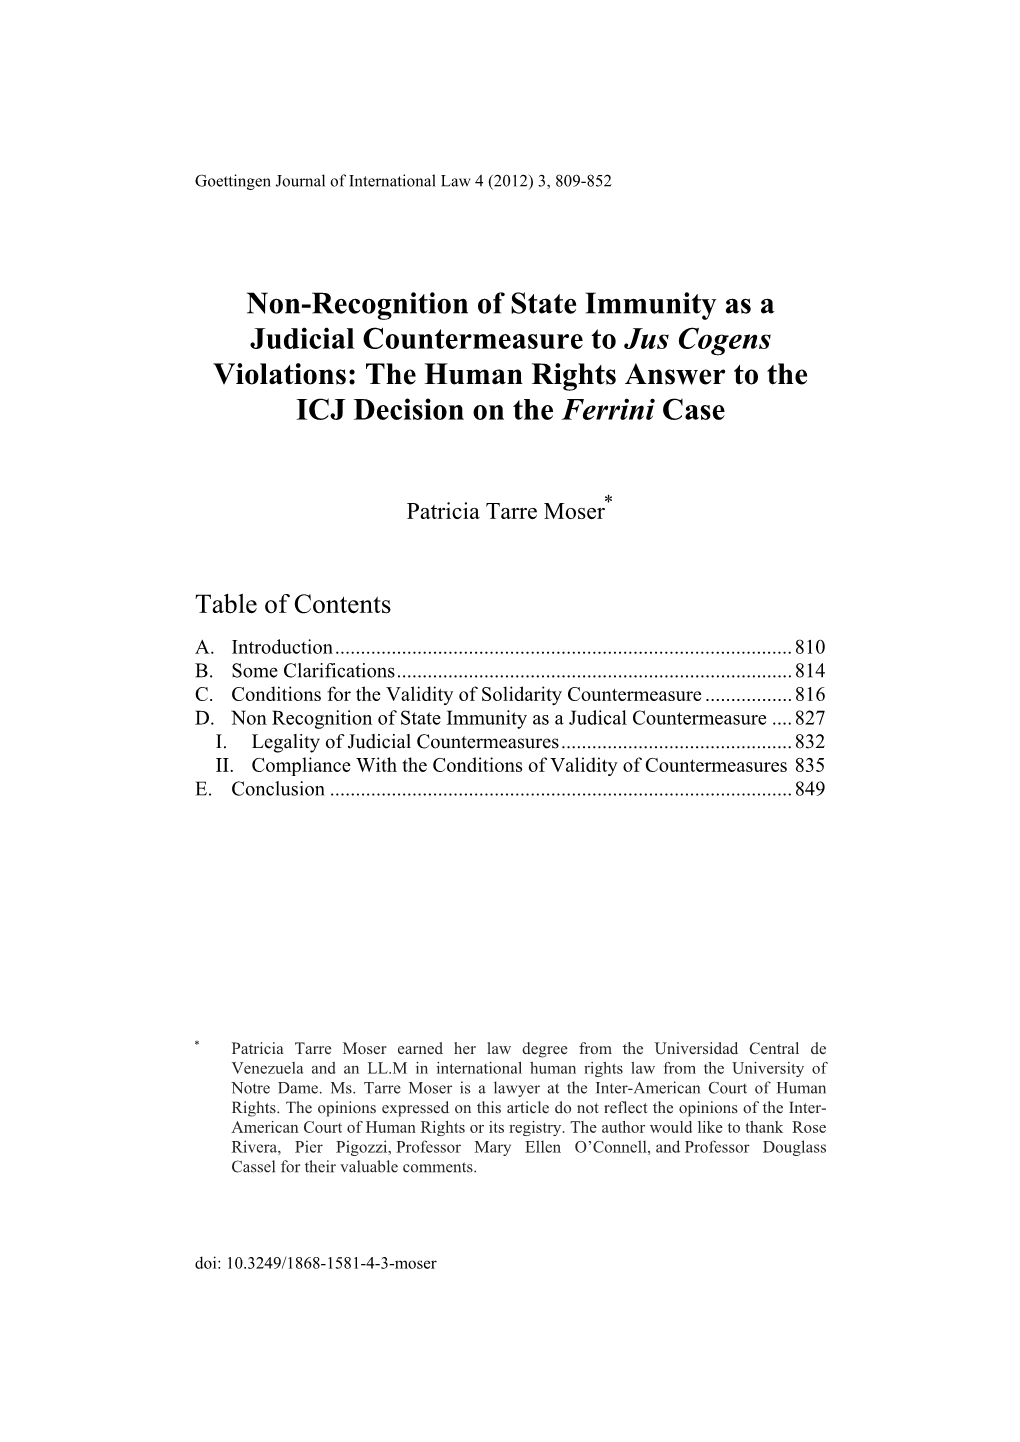 Non-Recognition of State Immunity As a Judicial Countermeasure to Jus Cogens Violations: the Human Rights Answer to the ICJ Decision on the Ferrini Case